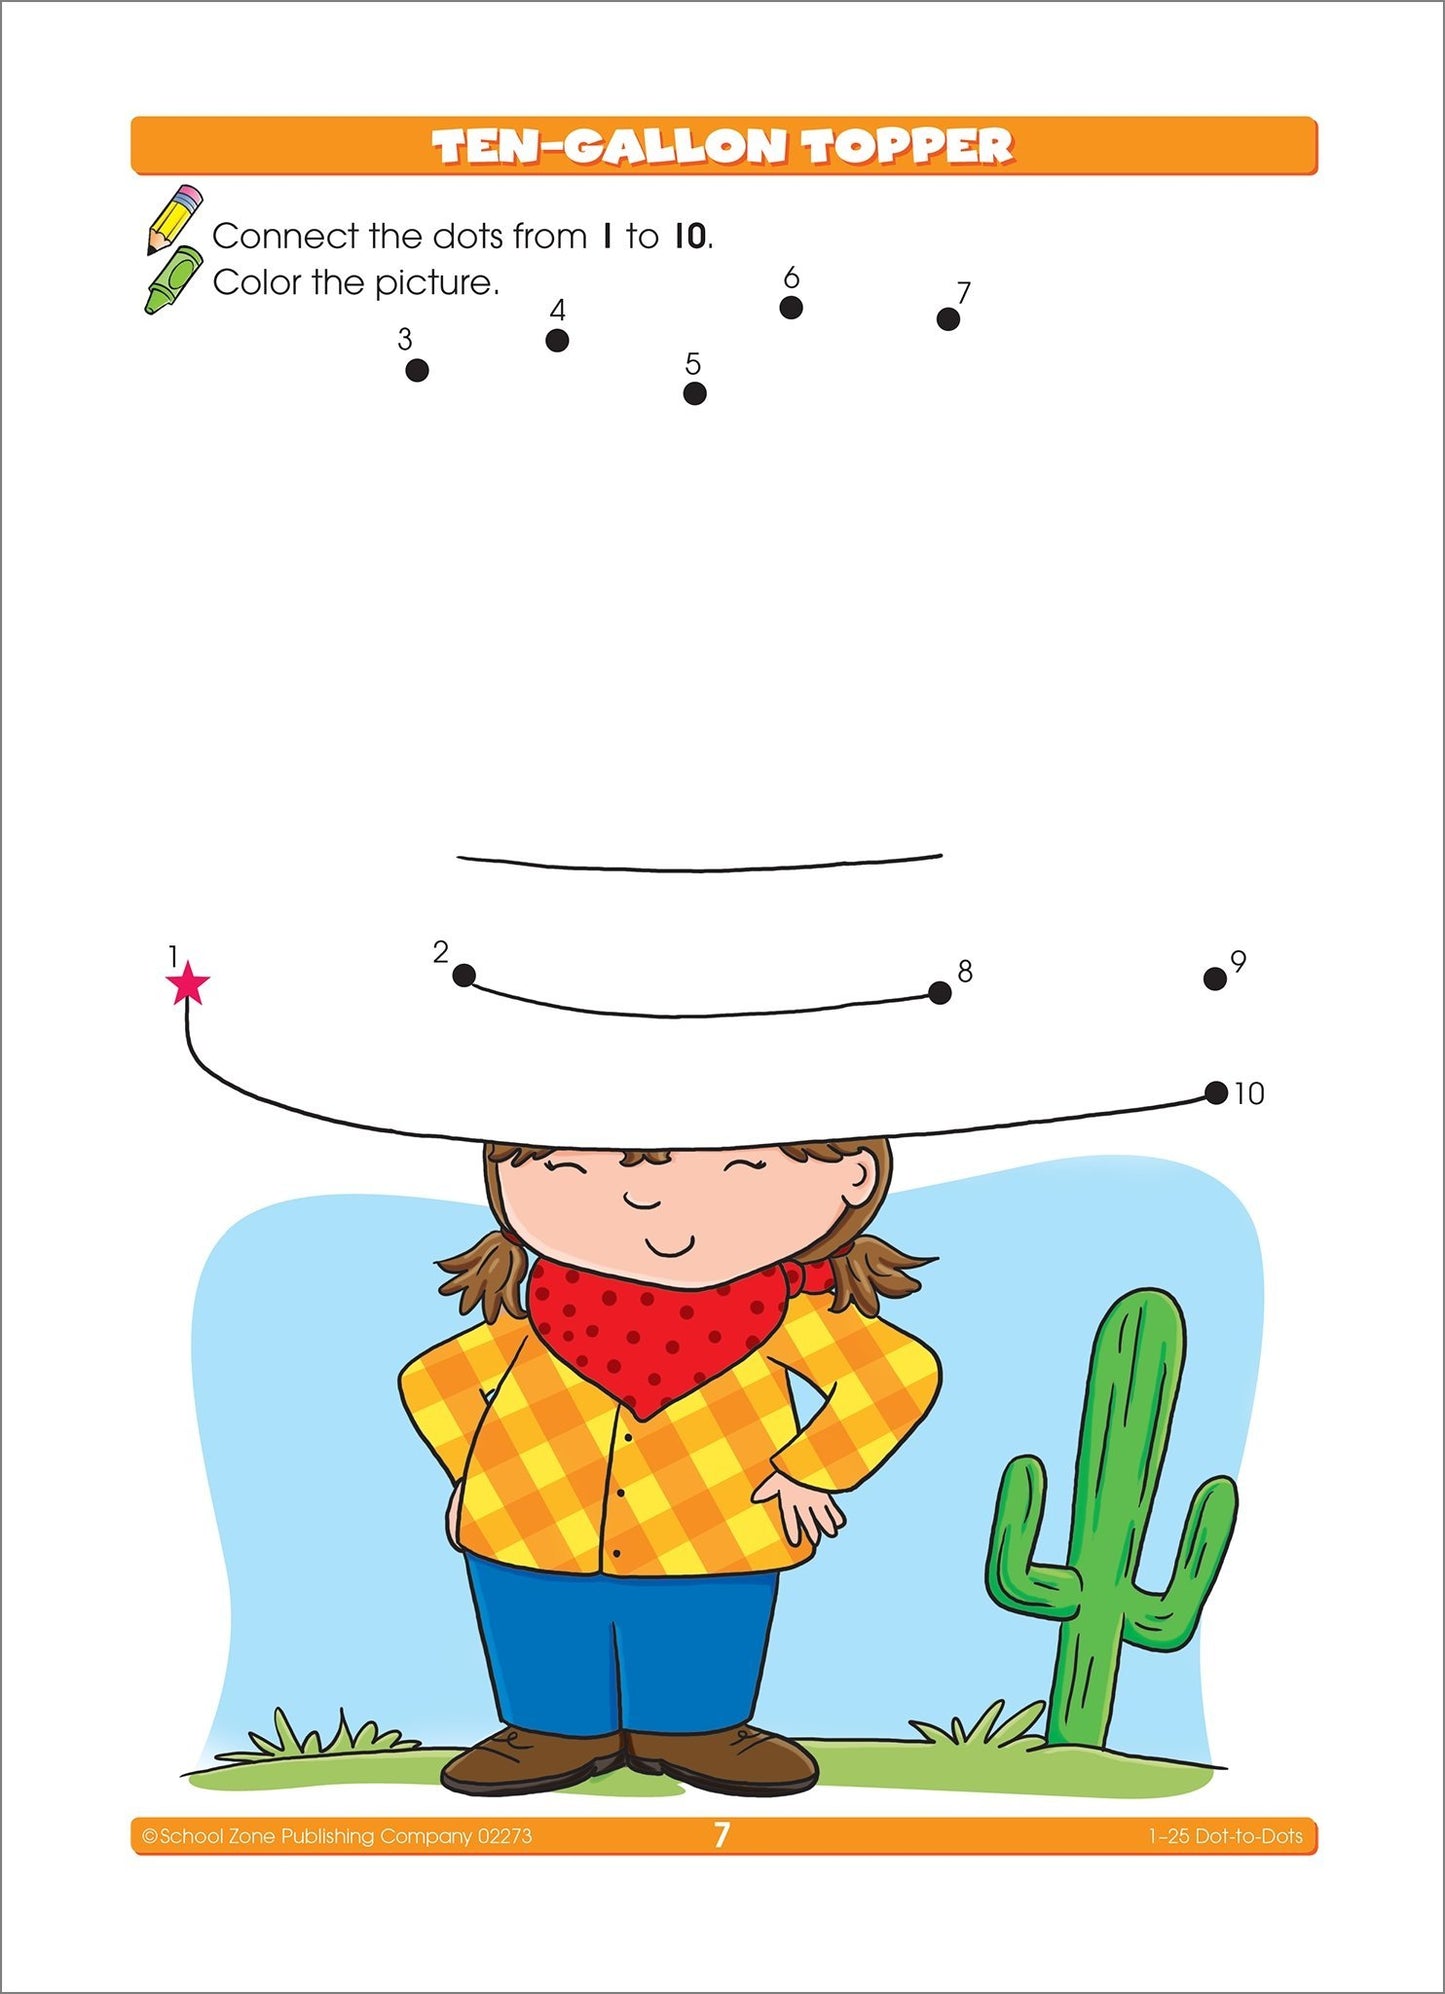 1-25 Dot-to-Dots Preschool Workbook - A frolicking collection of animal friends and playful scenes.